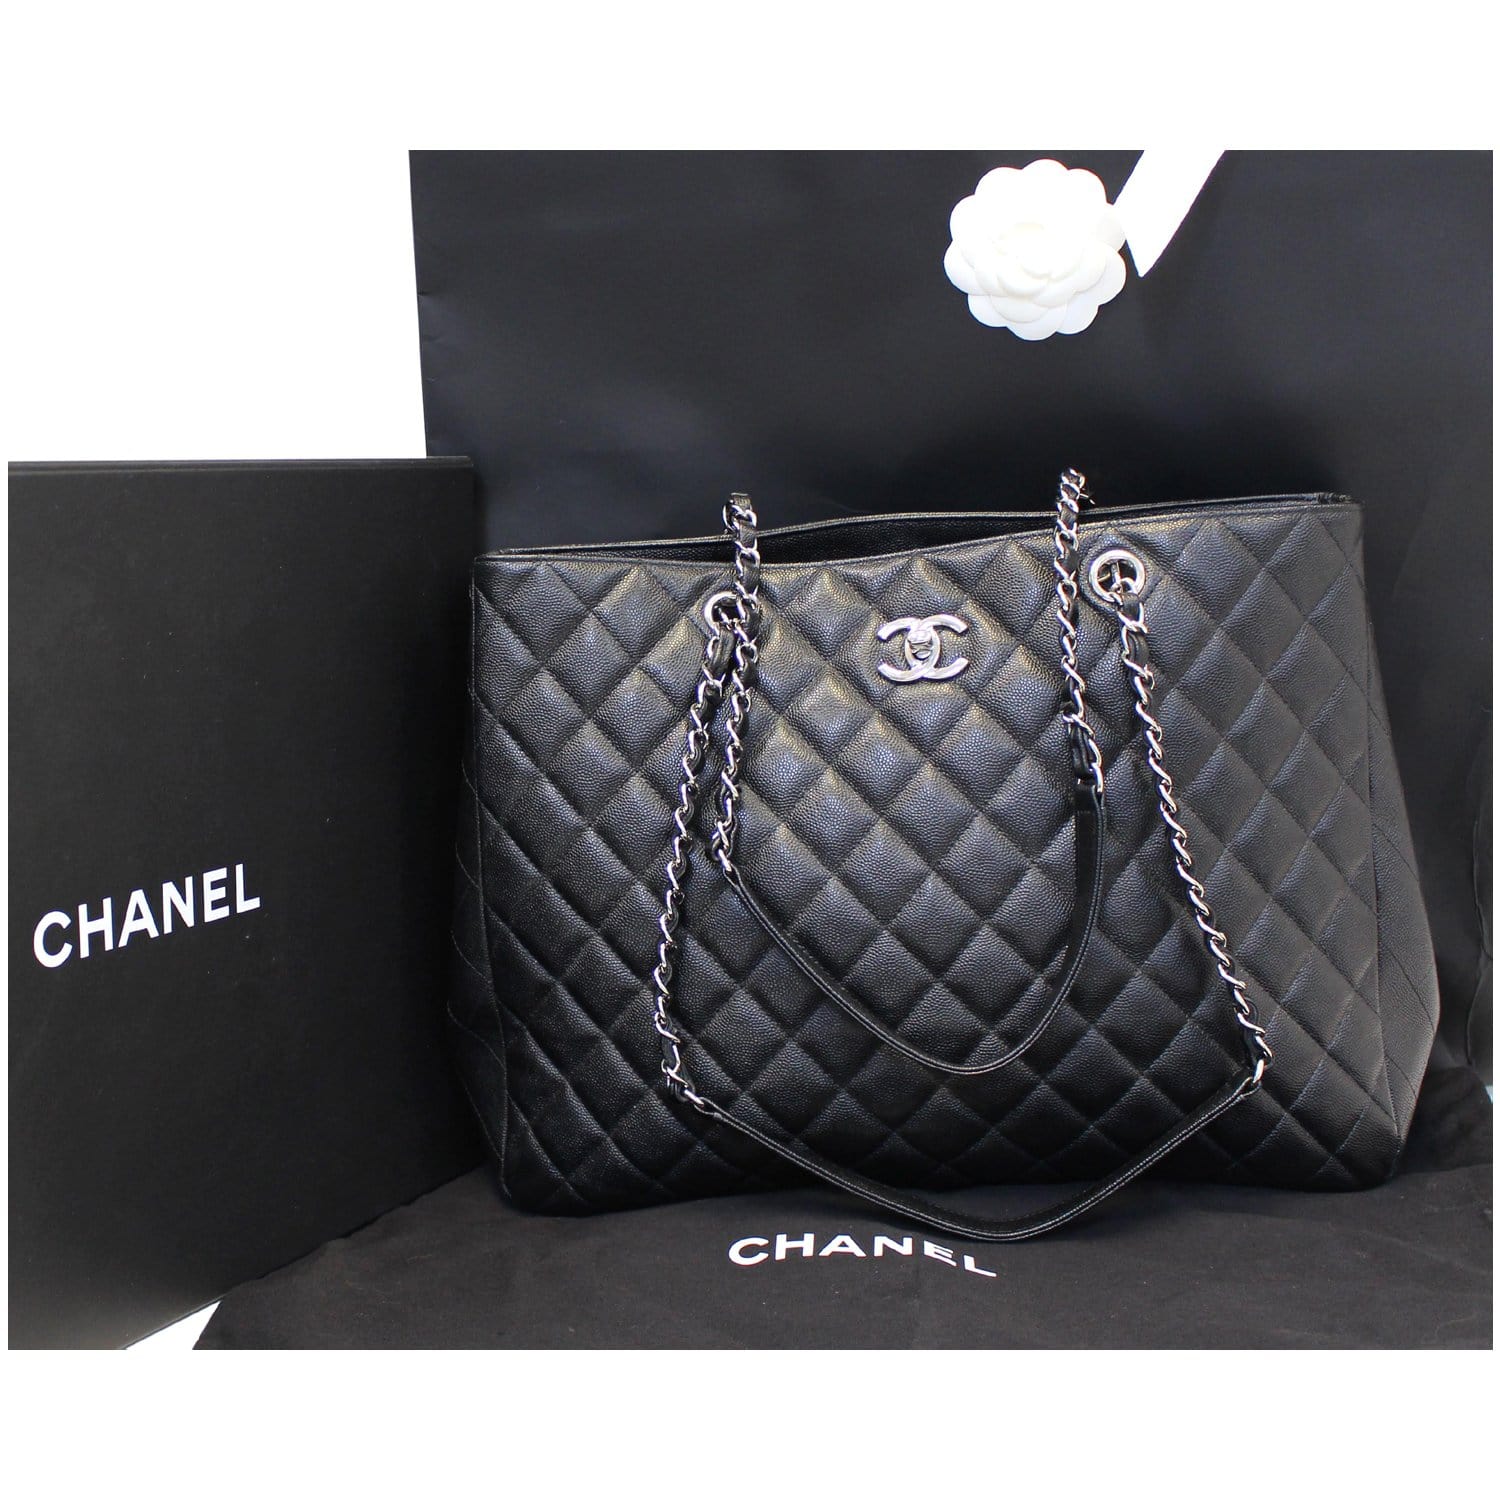 How You Can Properly Clean Your Chanel Bags - Couture USA